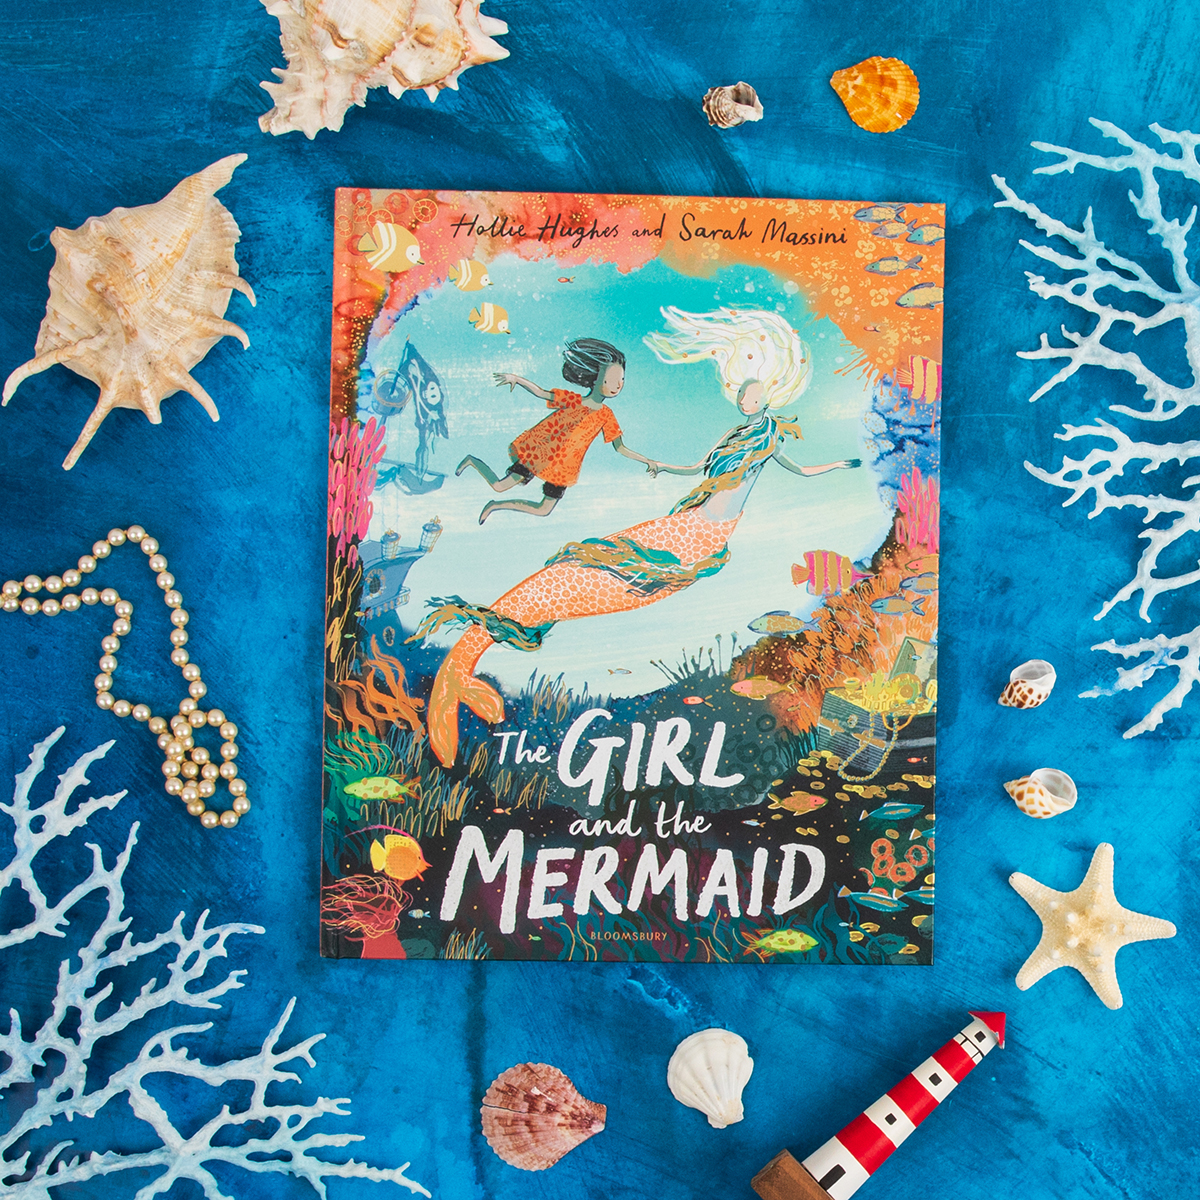 Let's take a magical dive into the beautiful new picture book, The Girl and the Mermaid, by @holliejhughes and illustrated by @SarahMassini 🧜 📙 Do you have a little one who loves mermaids? This is the perfect bedtime story for young children! bit.ly/3U6nXXJ